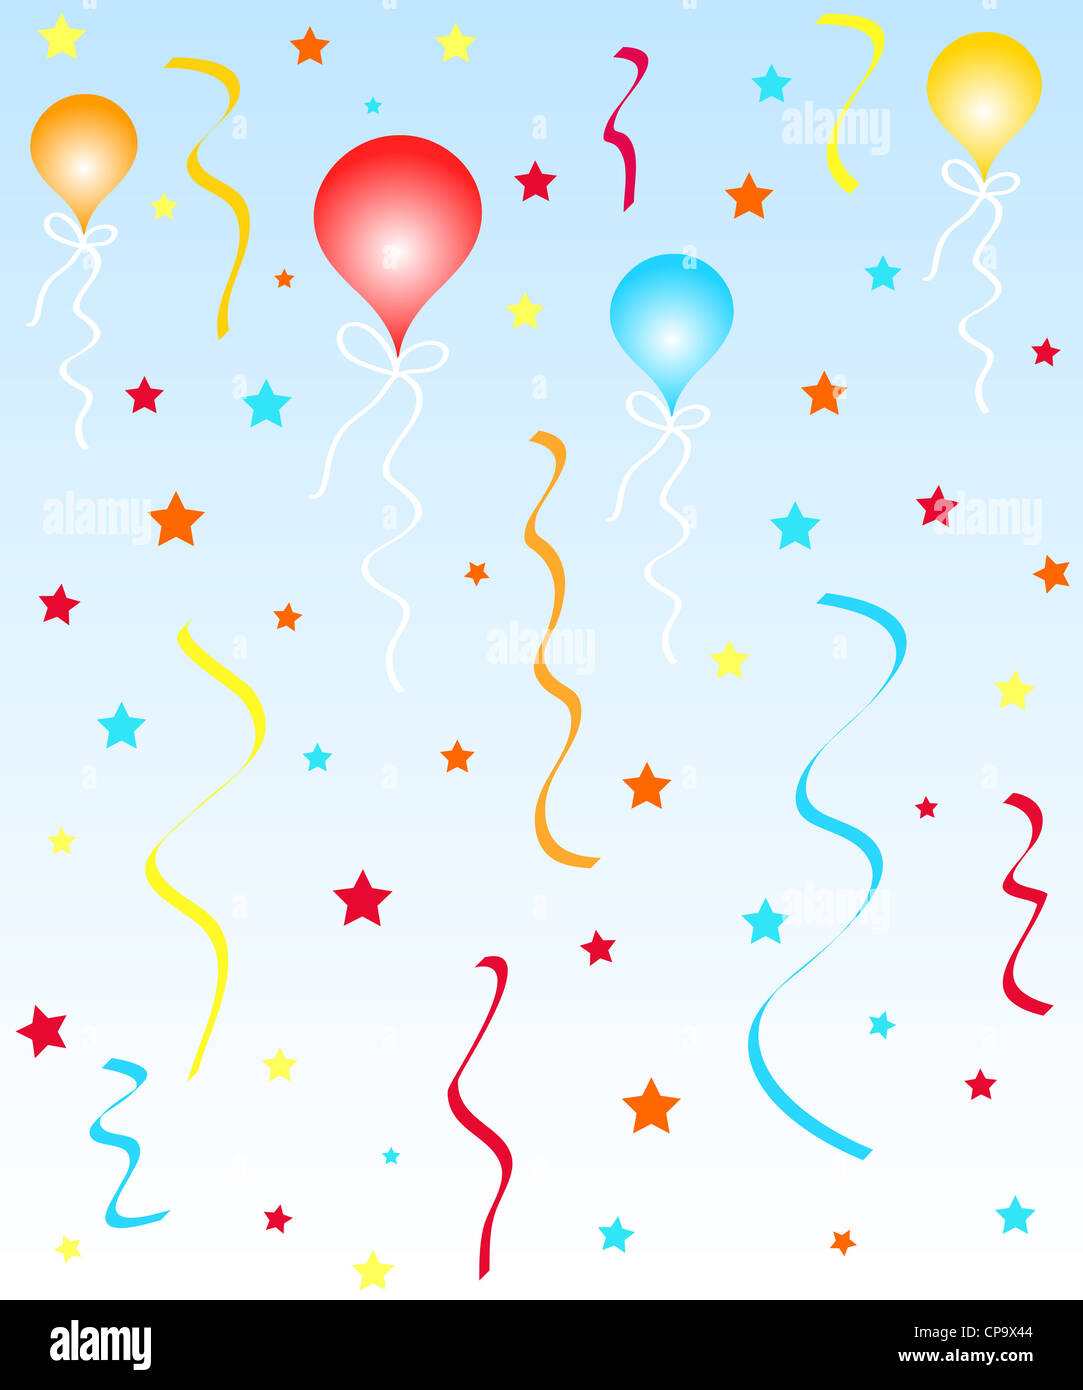 Colorful celebration balloons, ribbons and stars Stock Photo